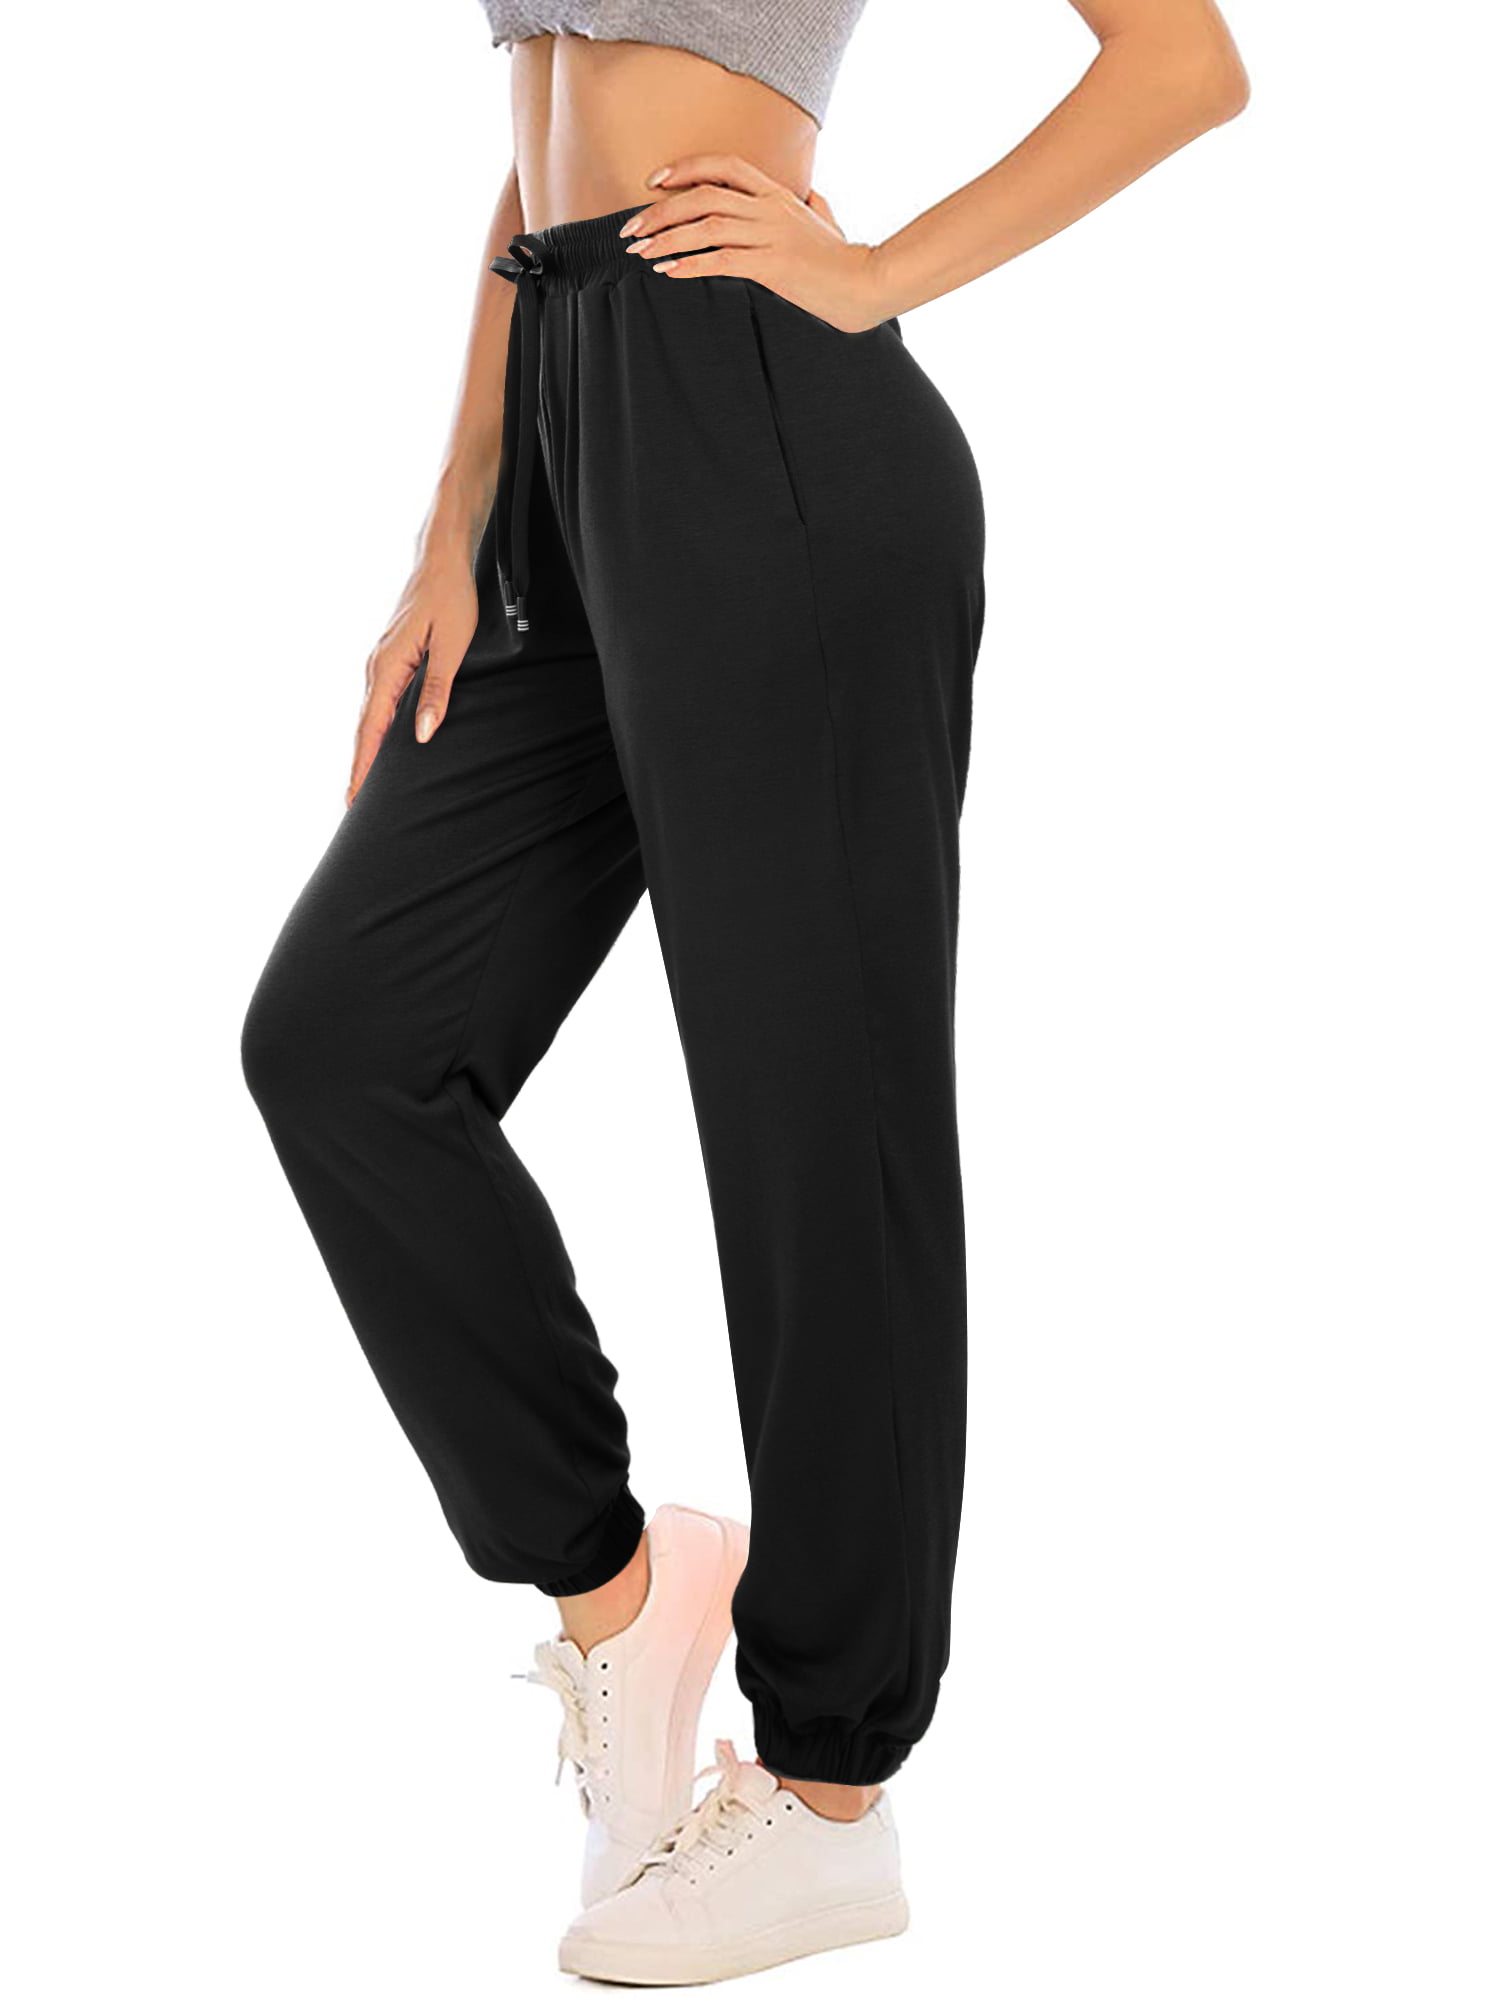 Hessimy Womens Joggers Sweatpants,Womens Active Workout Joggers Drawstring Lounge Pants Sweatpants with Pocket 